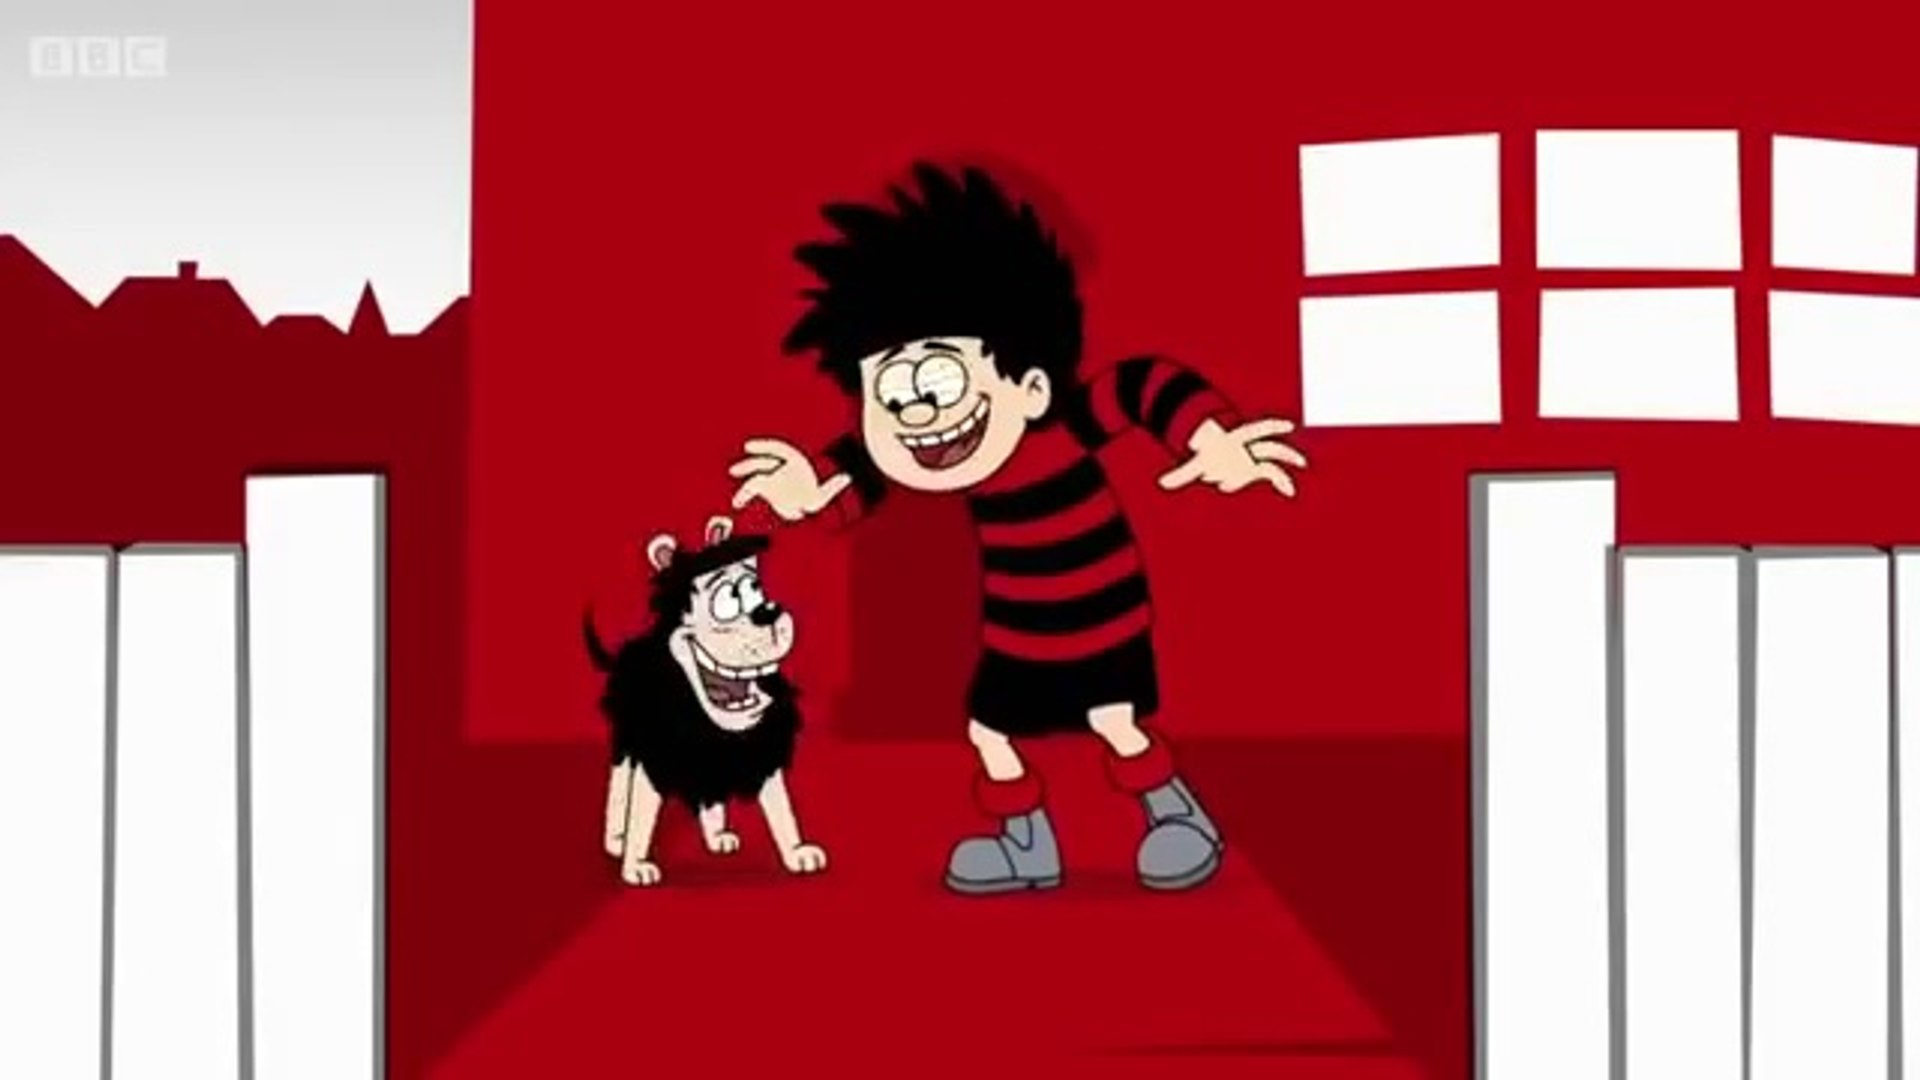 Dennis the Menace and Gnasher. Mike the Menace. Dennis the Menace movie. Dennis the Menace Macabre. Denis the menace show